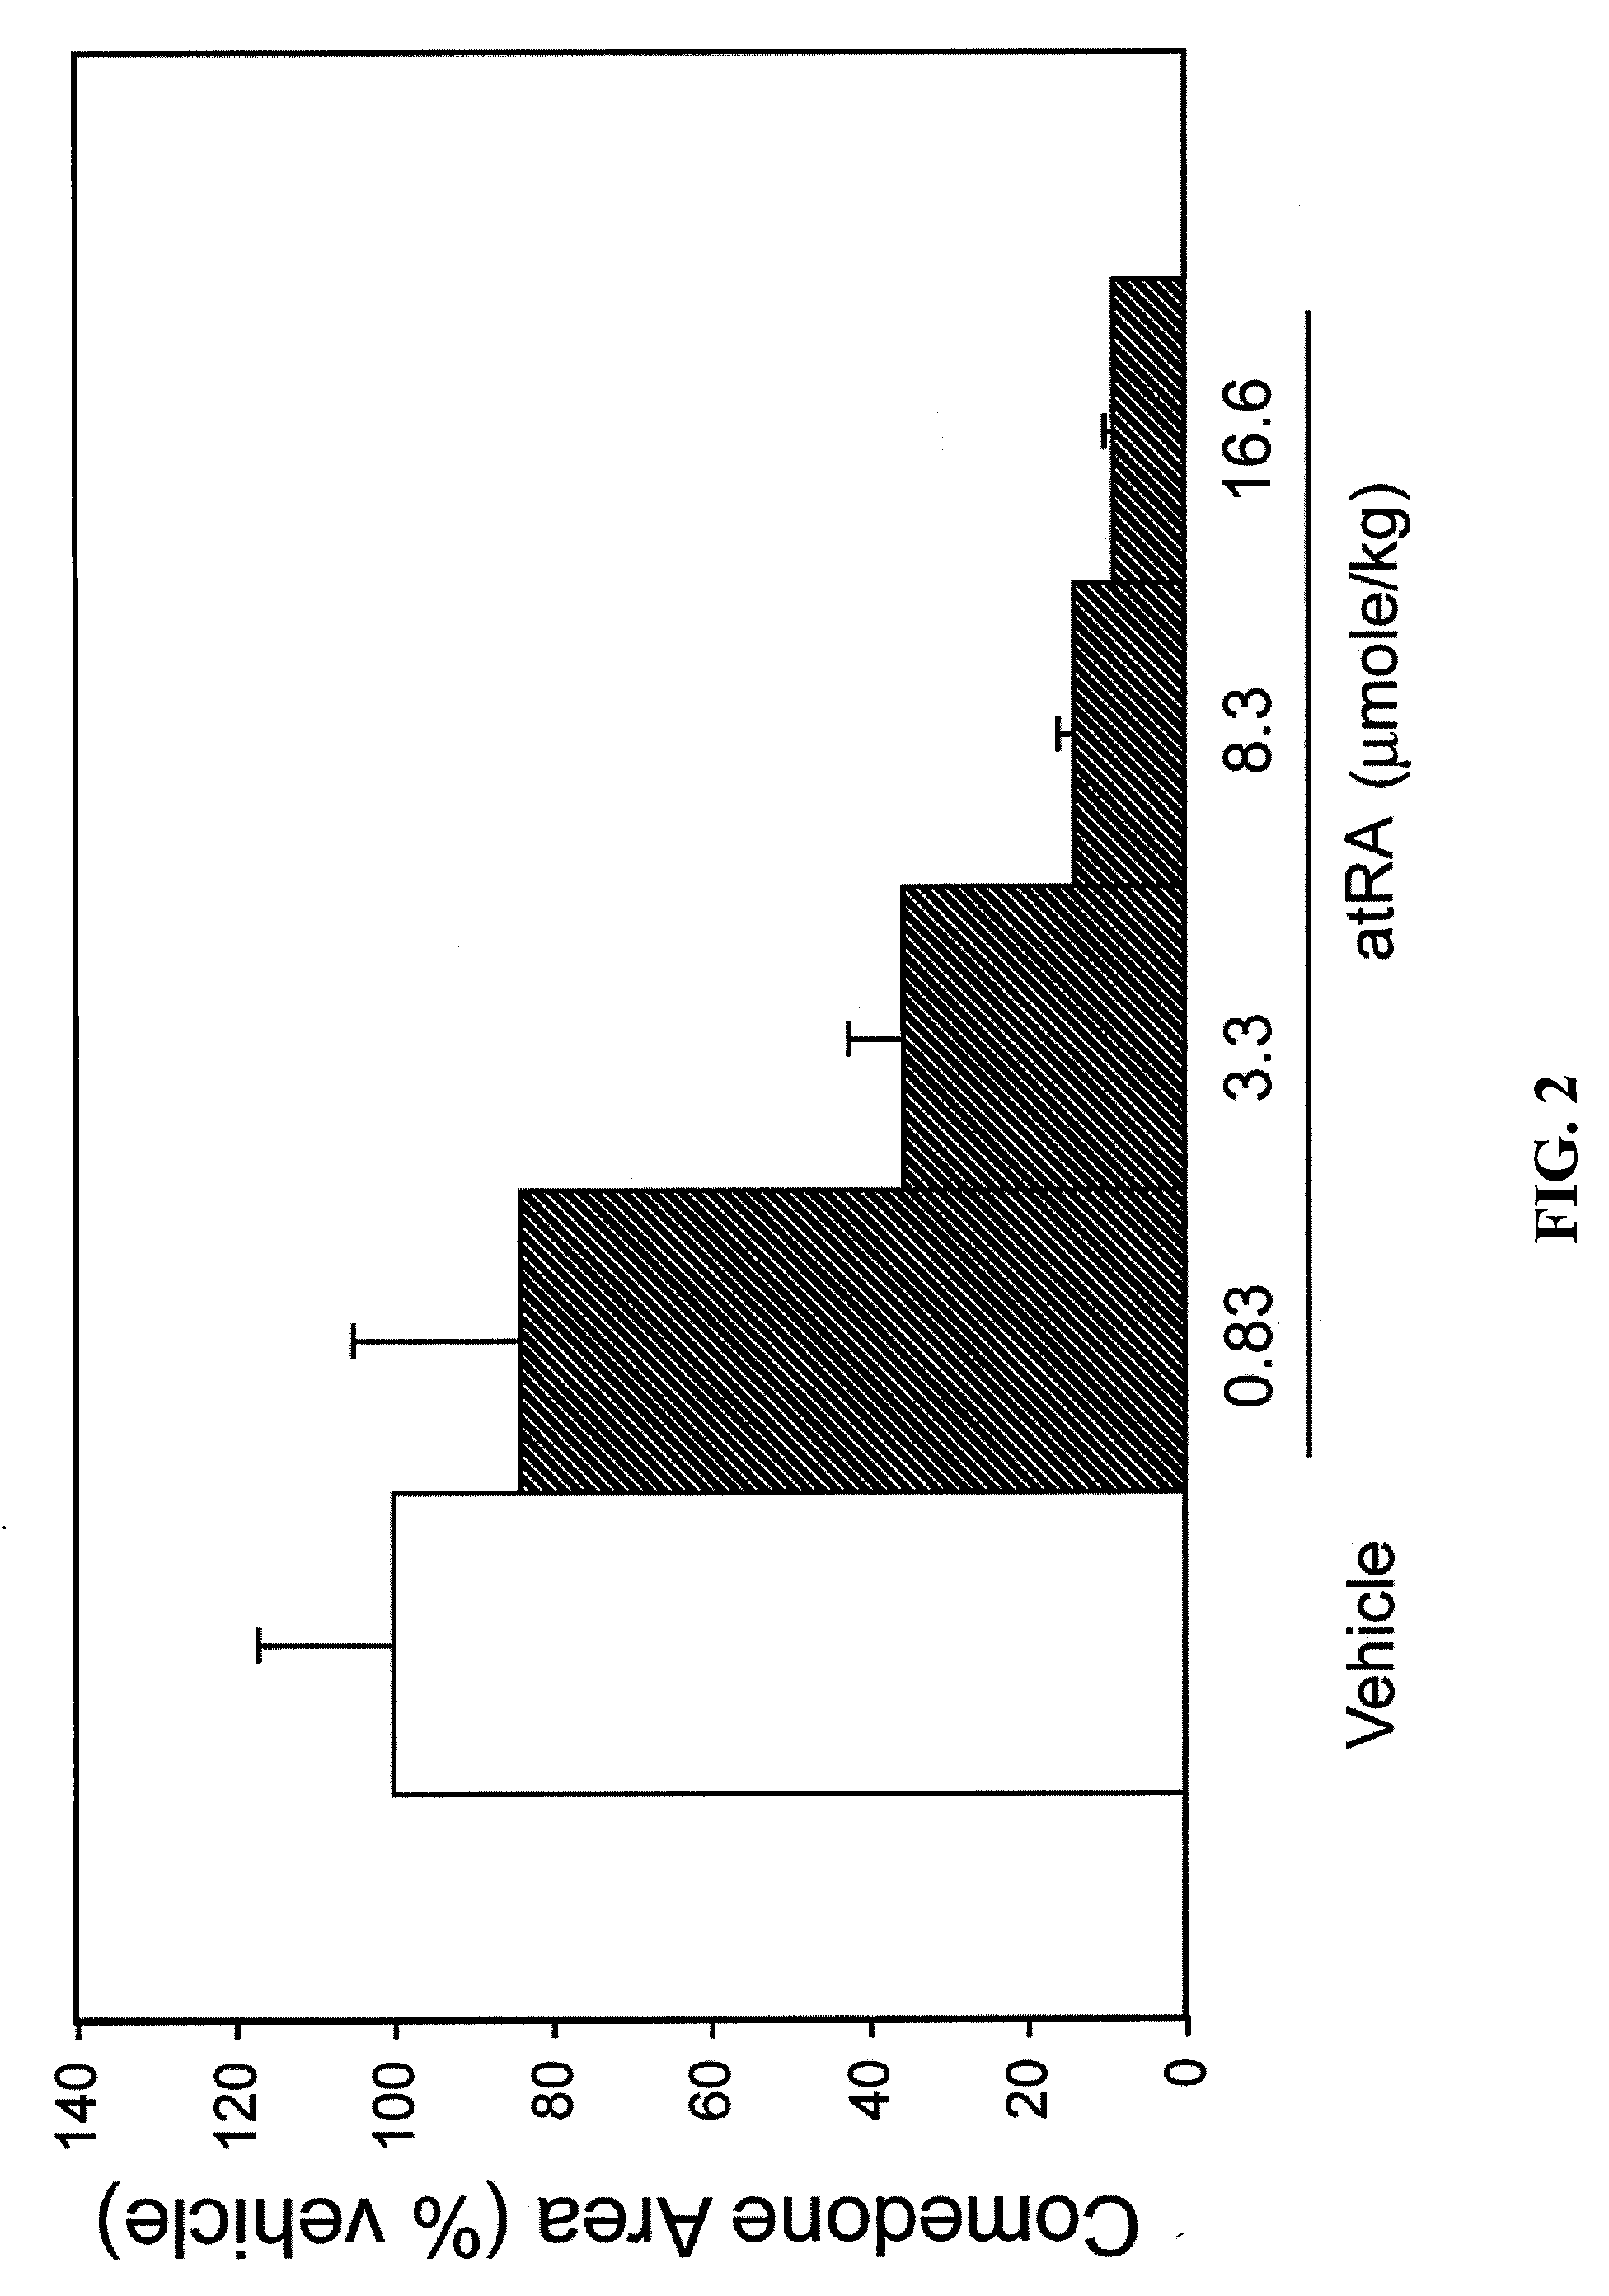 Compounds, compositions, kits and methods of use to orally and topically treat acne and other skin conditions by administering a 19-nor containing vitamin d analog with or without a retinoid